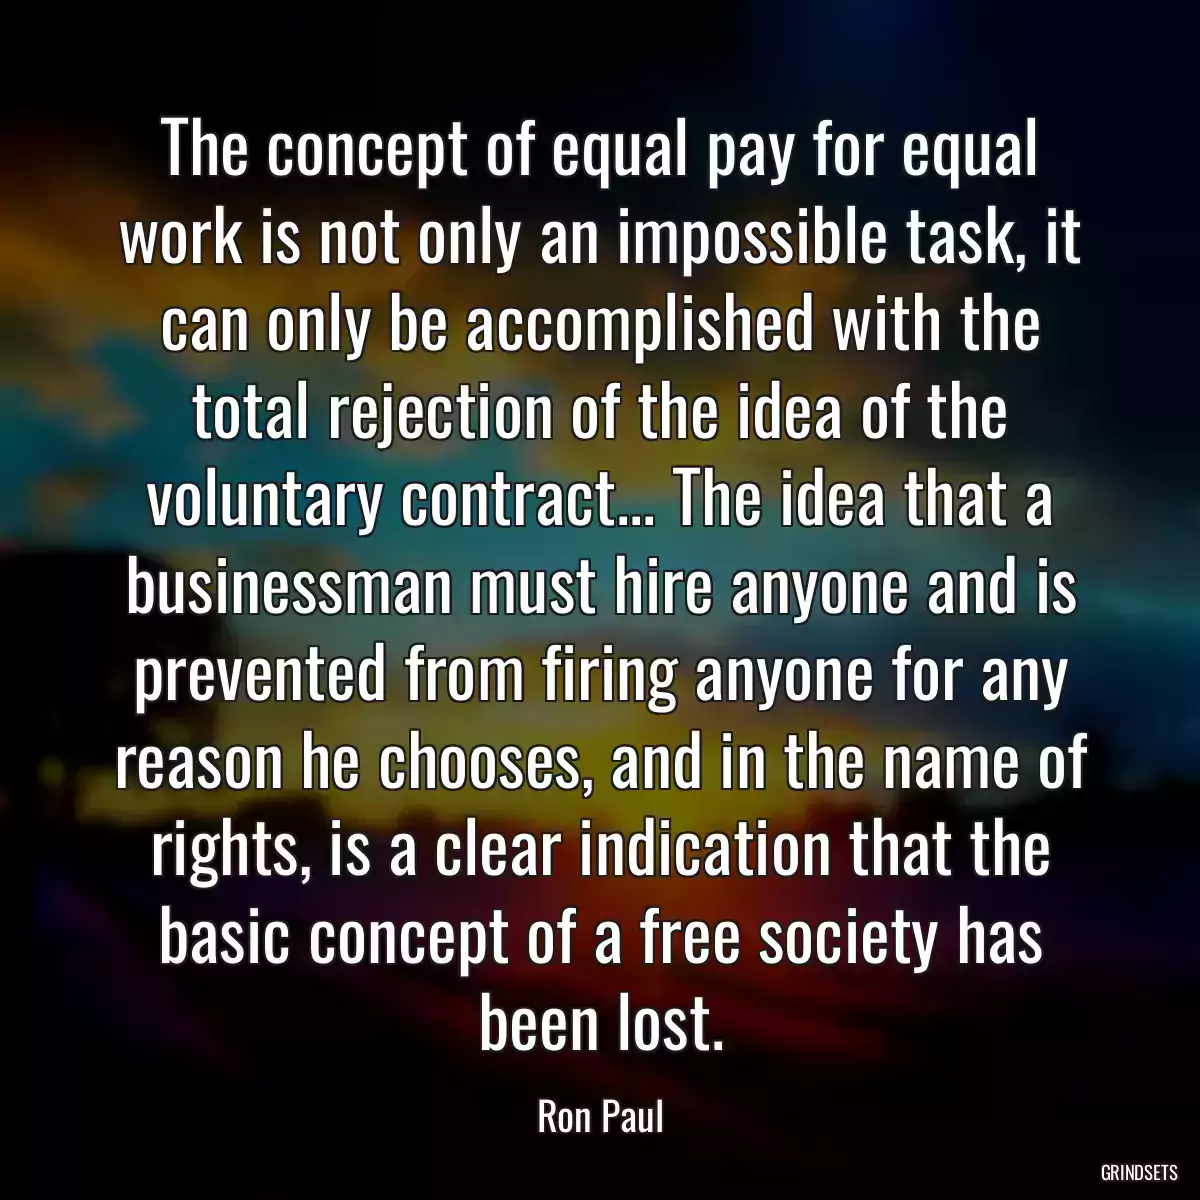 The concept of equal pay for equal work is not only an impossible task, it can only be accomplished with the total rejection of the idea of the voluntary contract... The idea that a businessman must hire anyone and is prevented from firing anyone for any reason he chooses, and in the name of rights, is a clear indication that the basic concept of a free society has been lost.